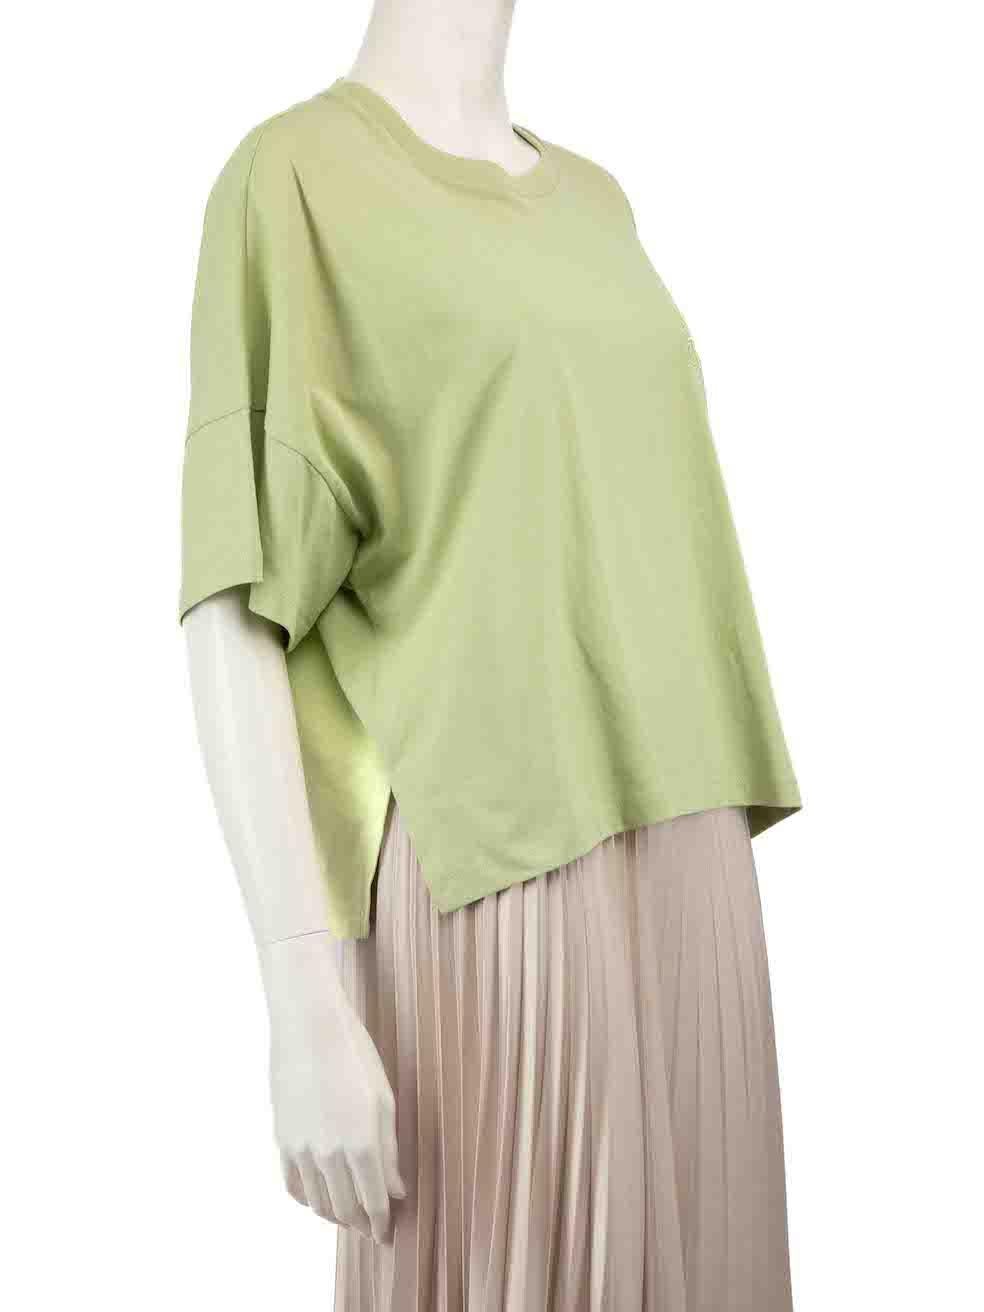 ConditionCONDITION is Very good. Hardly any visible wear to top is evident on this used Loewe designer resale item.Details
 
  Green
 
 
  Cotton
 
 
  T-Shirt
 
 
  Round neck
 
 
  Boxy fit
 
 
  Anagram embroidered detail
 
 
 
 
 
 
 
 
 
 NO